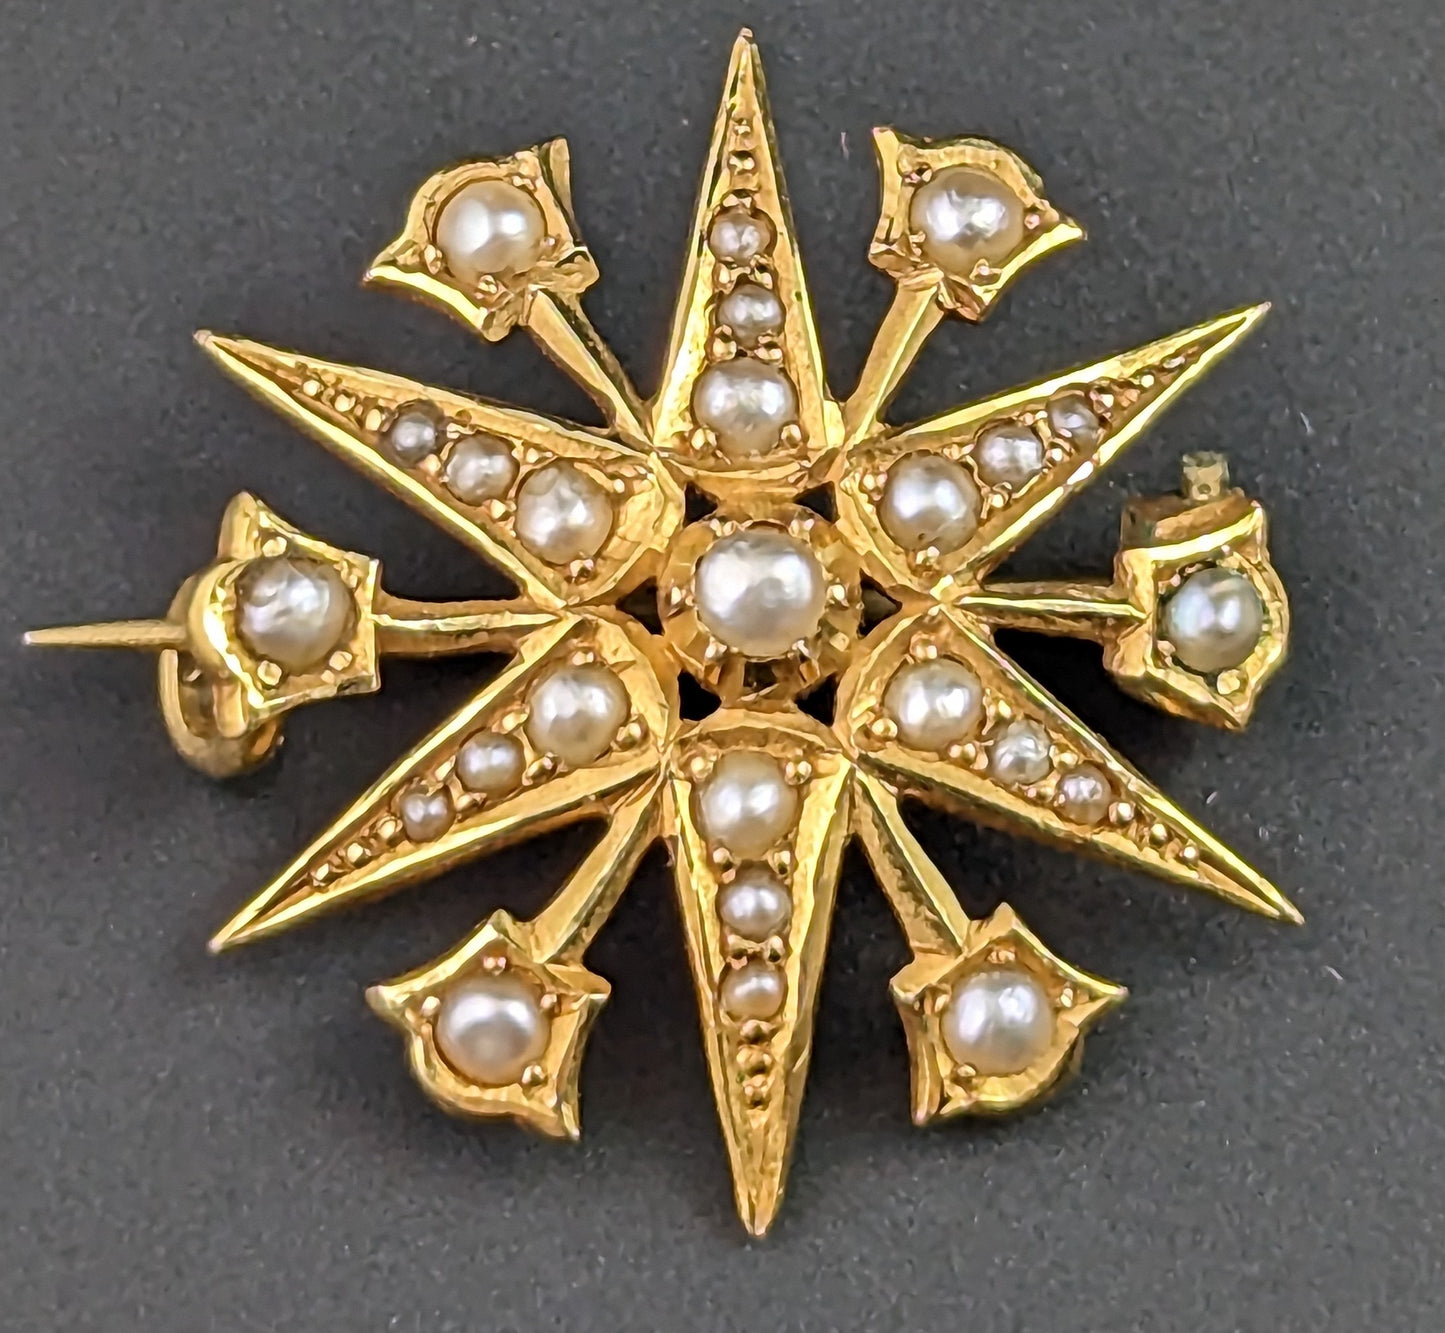 Antique Star brooch, 15ct yellow gold, Pearl, Starburst